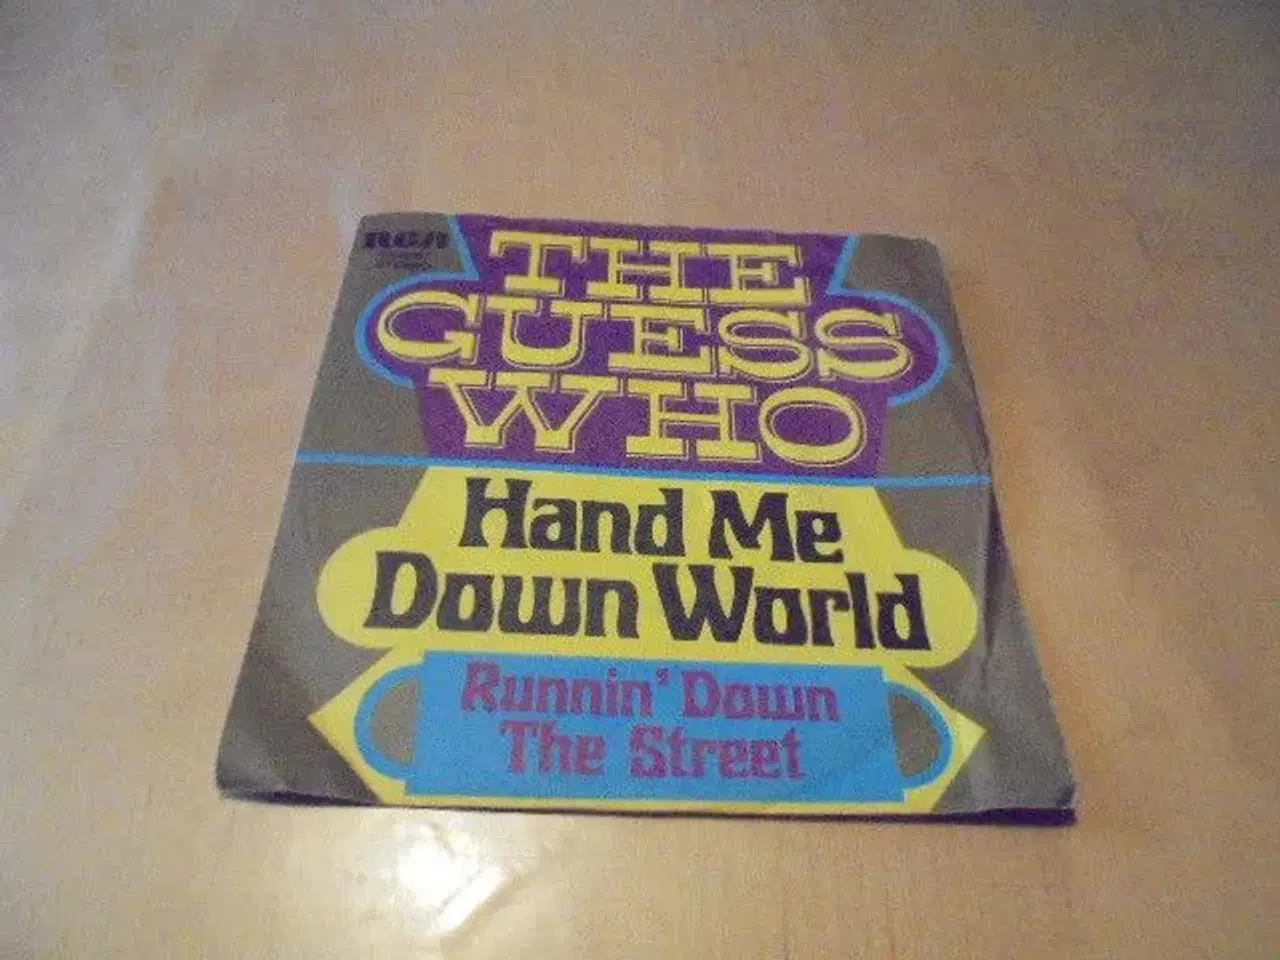 Billede 1 - Single - The Guess Who -  Hand me down World 